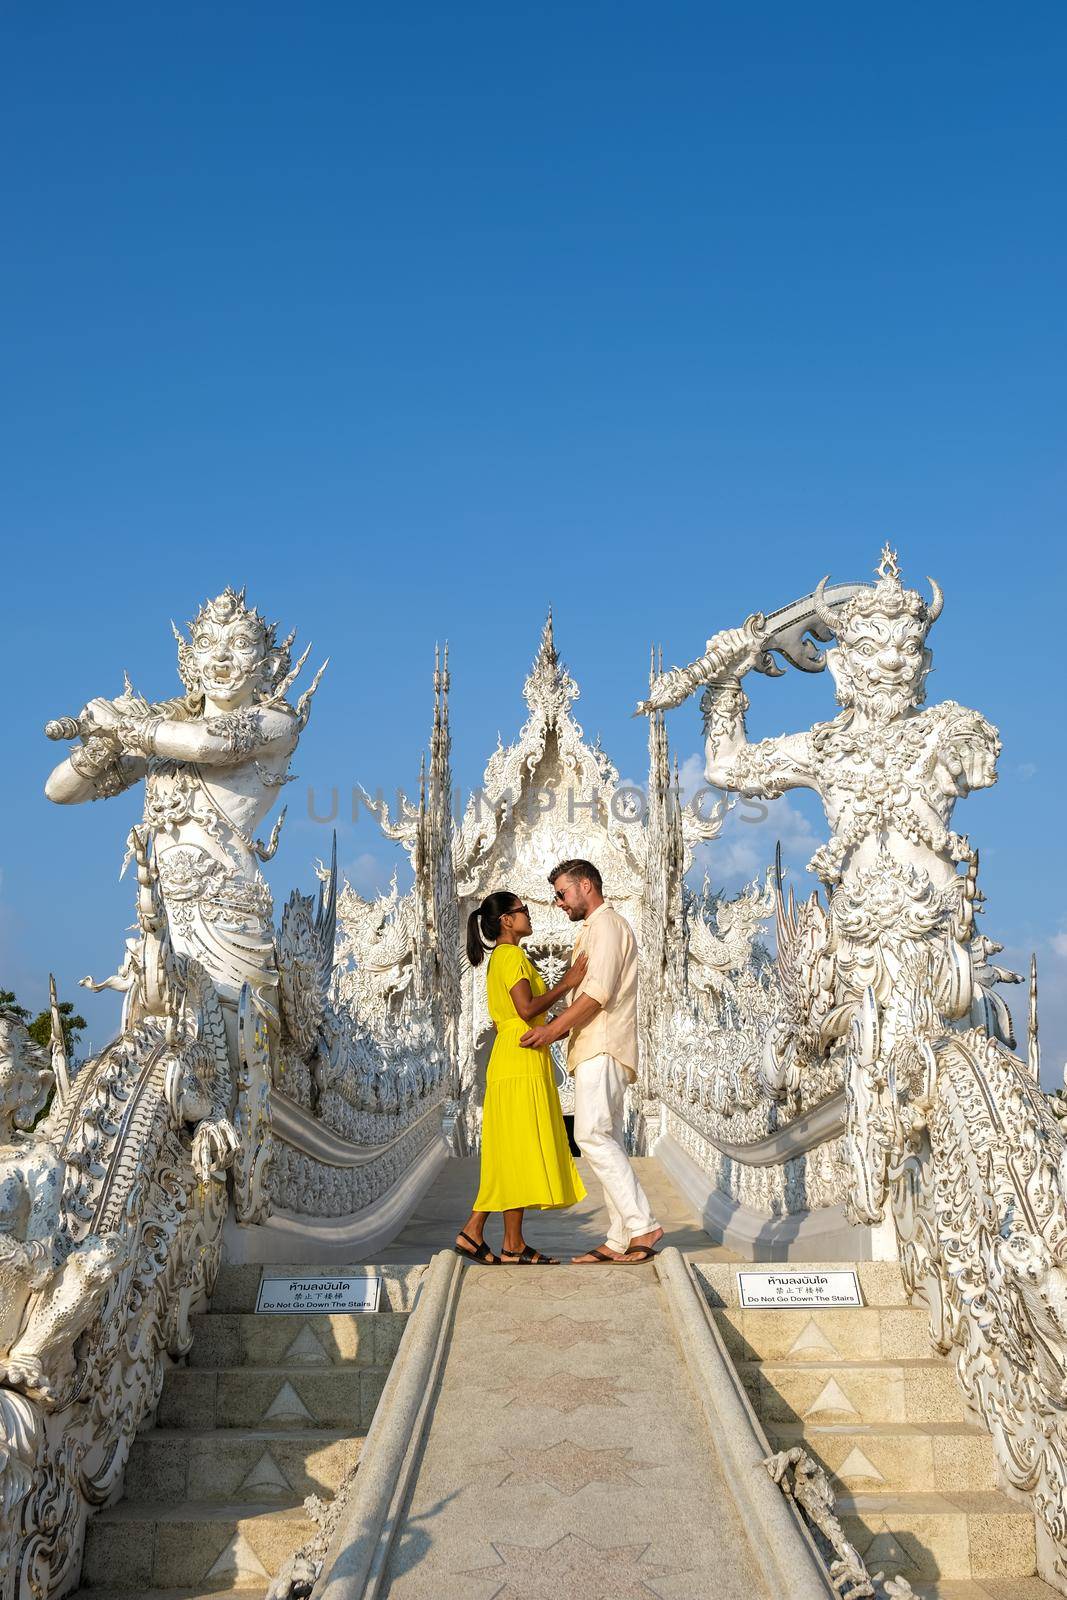 Chiang Rai Thailand, white temple Chiangrai during sunset, Wat Rong Khun, aka The White Temple, in Chiang Rai, Thailand. Panorama white temple Thailand, couple man and woman visit temple